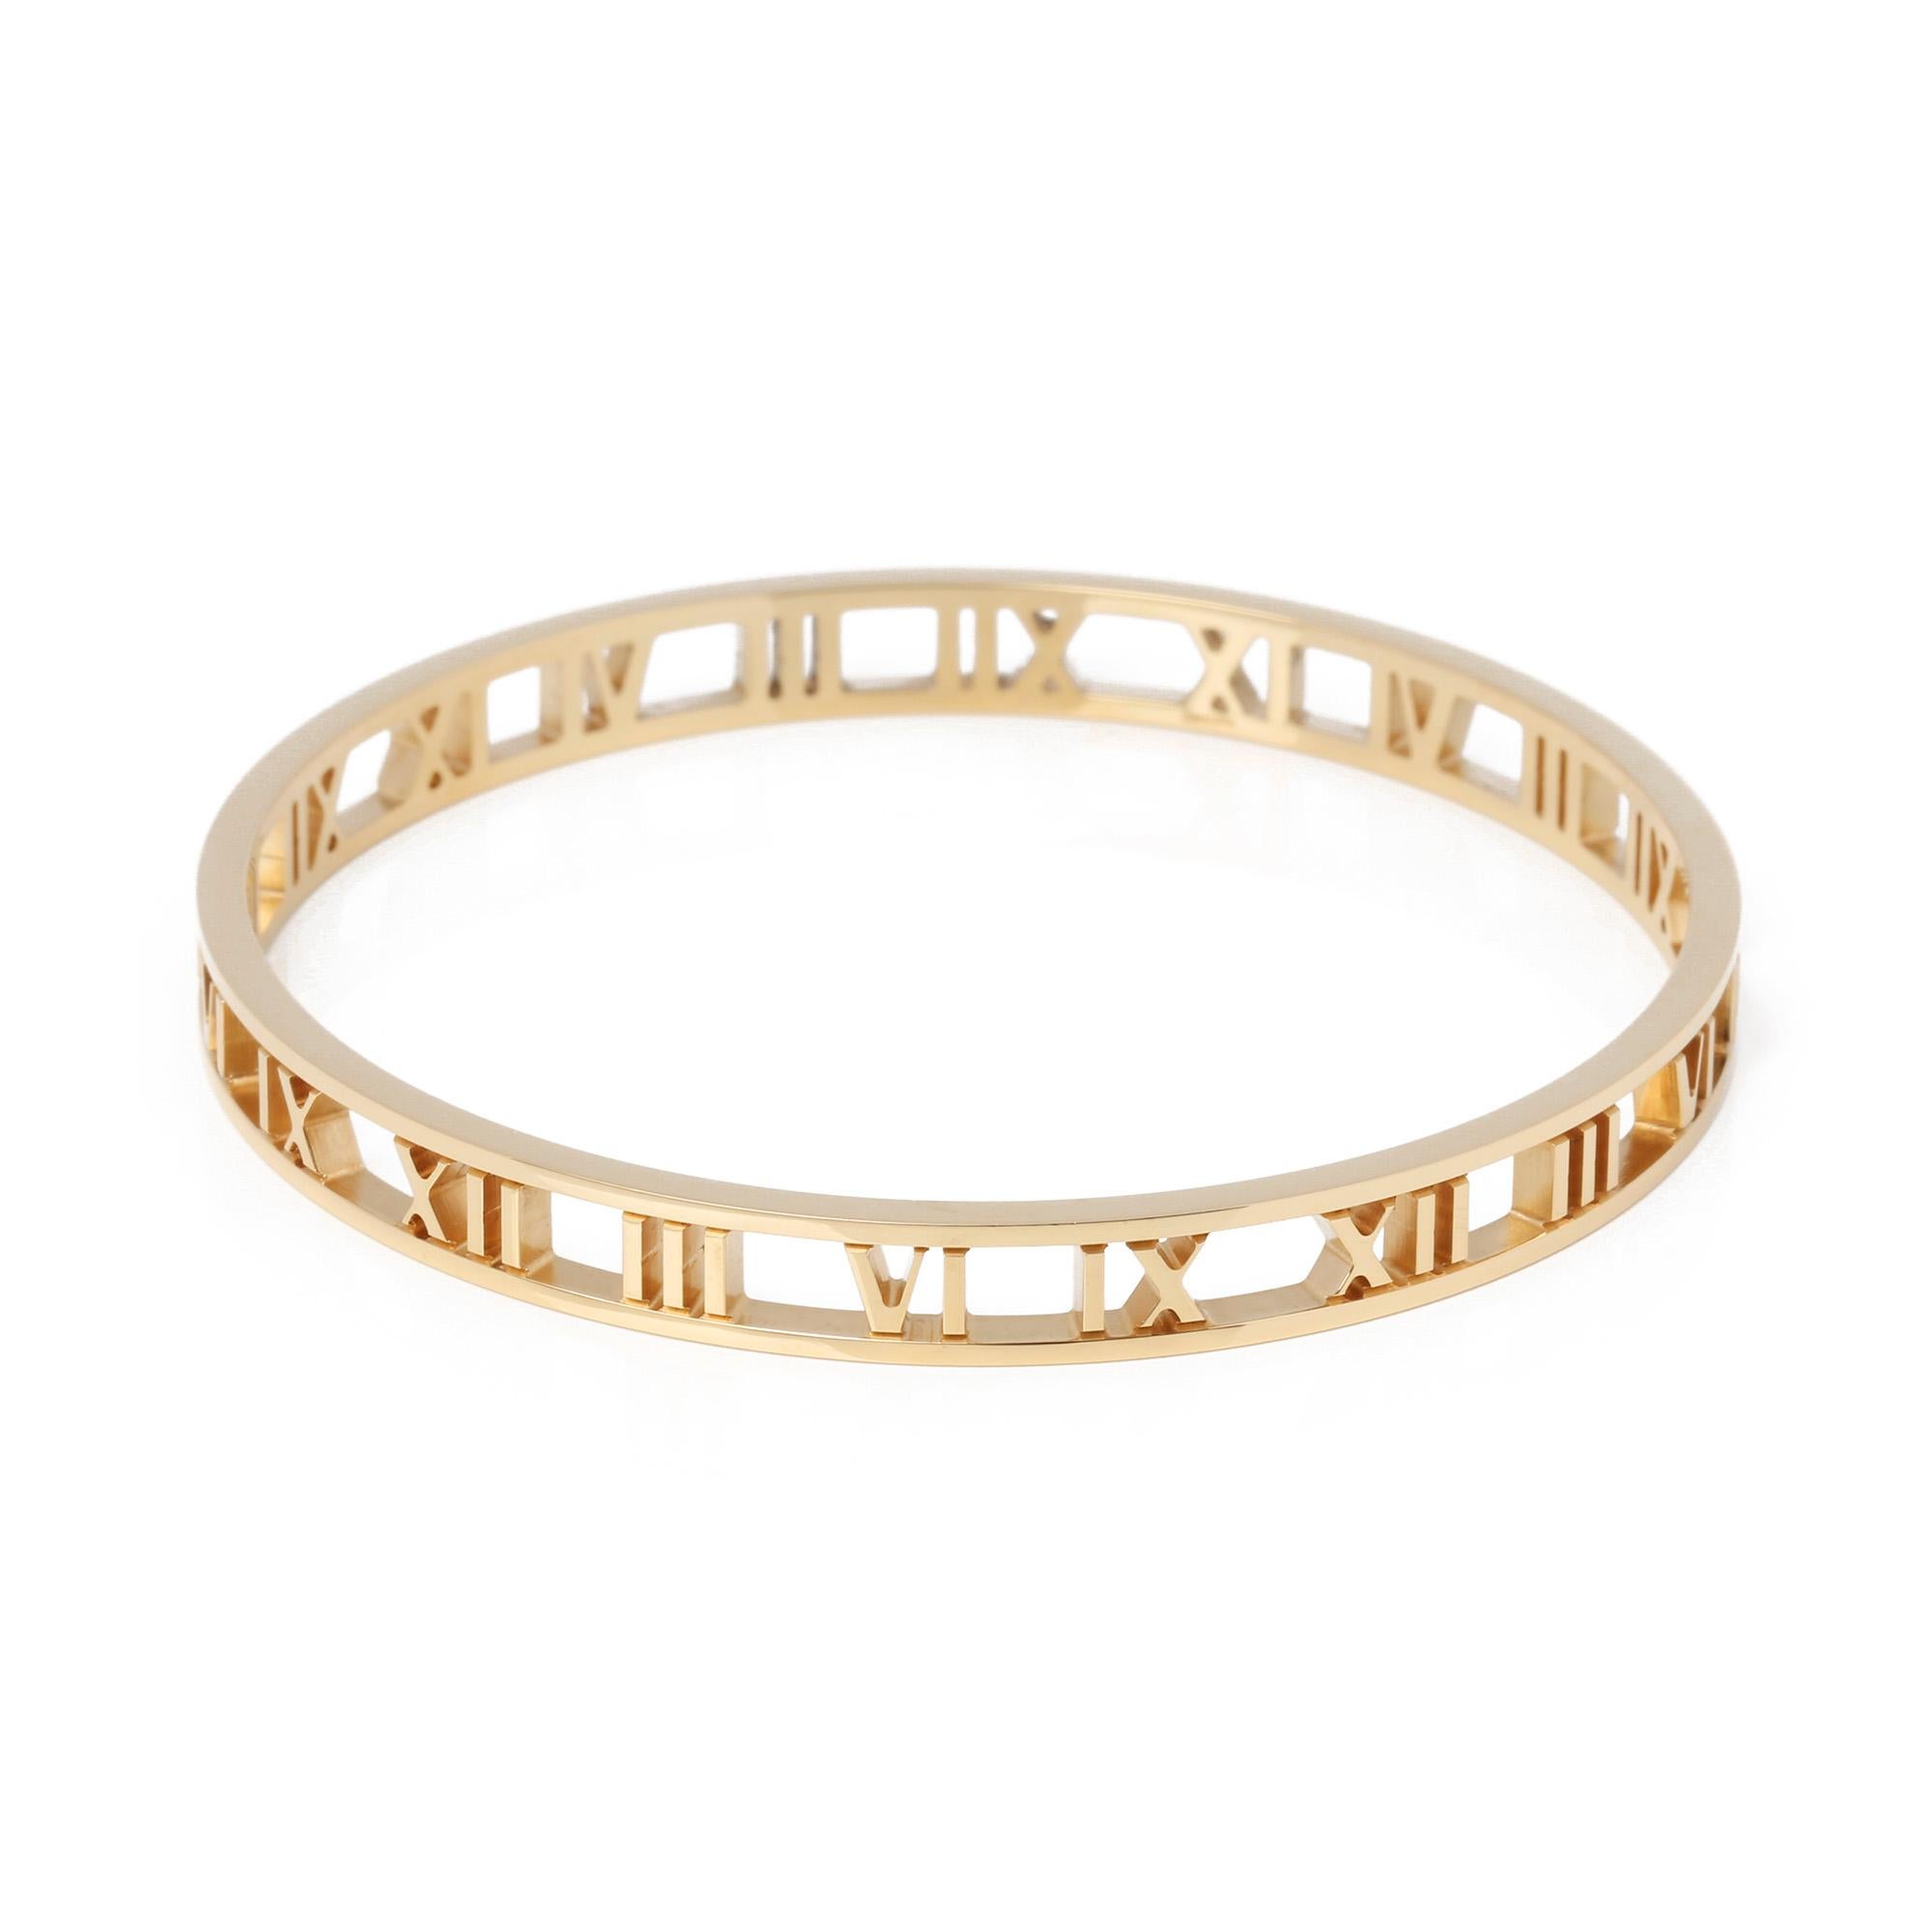 This pull on bangle by Tiffany & Co is from their Atlas Collection and features an open roman numeral design in 18ct yellow gold. The bangle is the larger option with a circumference of 19cm and an internal diameter of 6.5cm. Complete with Tiffany &